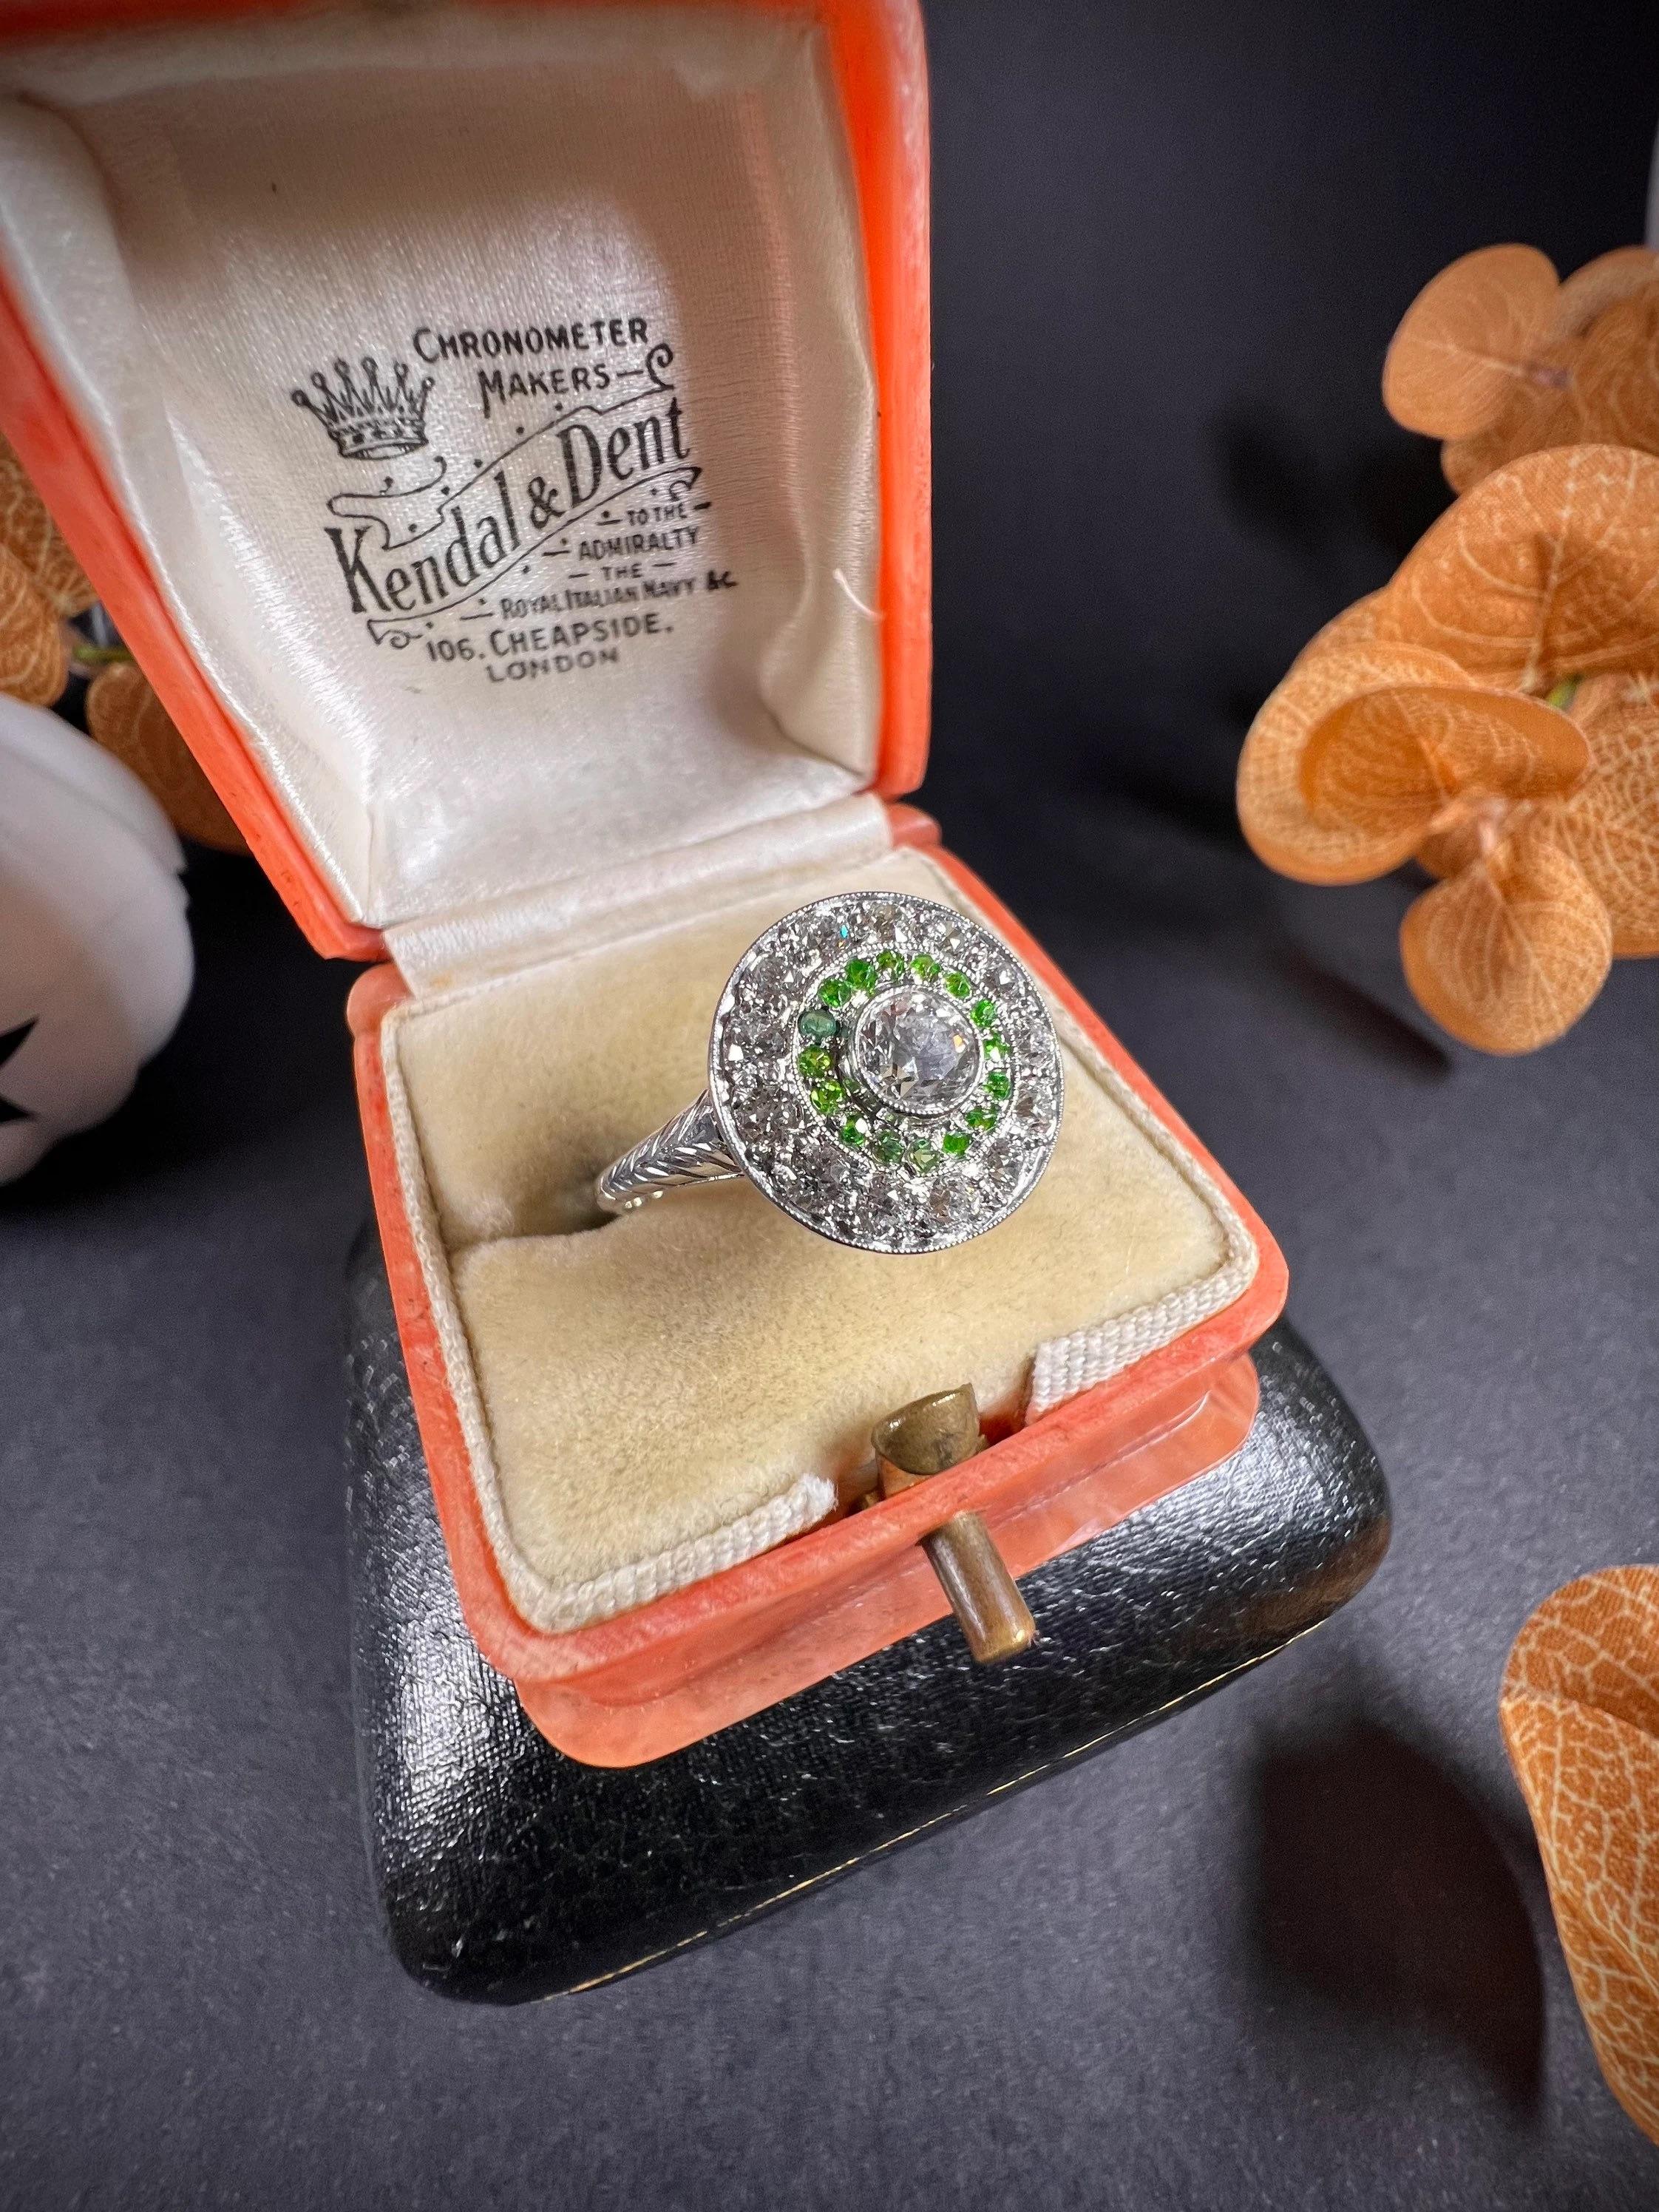 Antique Target Ring 

18ct White Gold

Circa 1910

Original, Edwardian target ring. Set with a natural, centre diamond, surrounded by gorgeous demantoid garnets & a halo of sparkling diamonds. Mounted on a white gold shank with beautifully hand